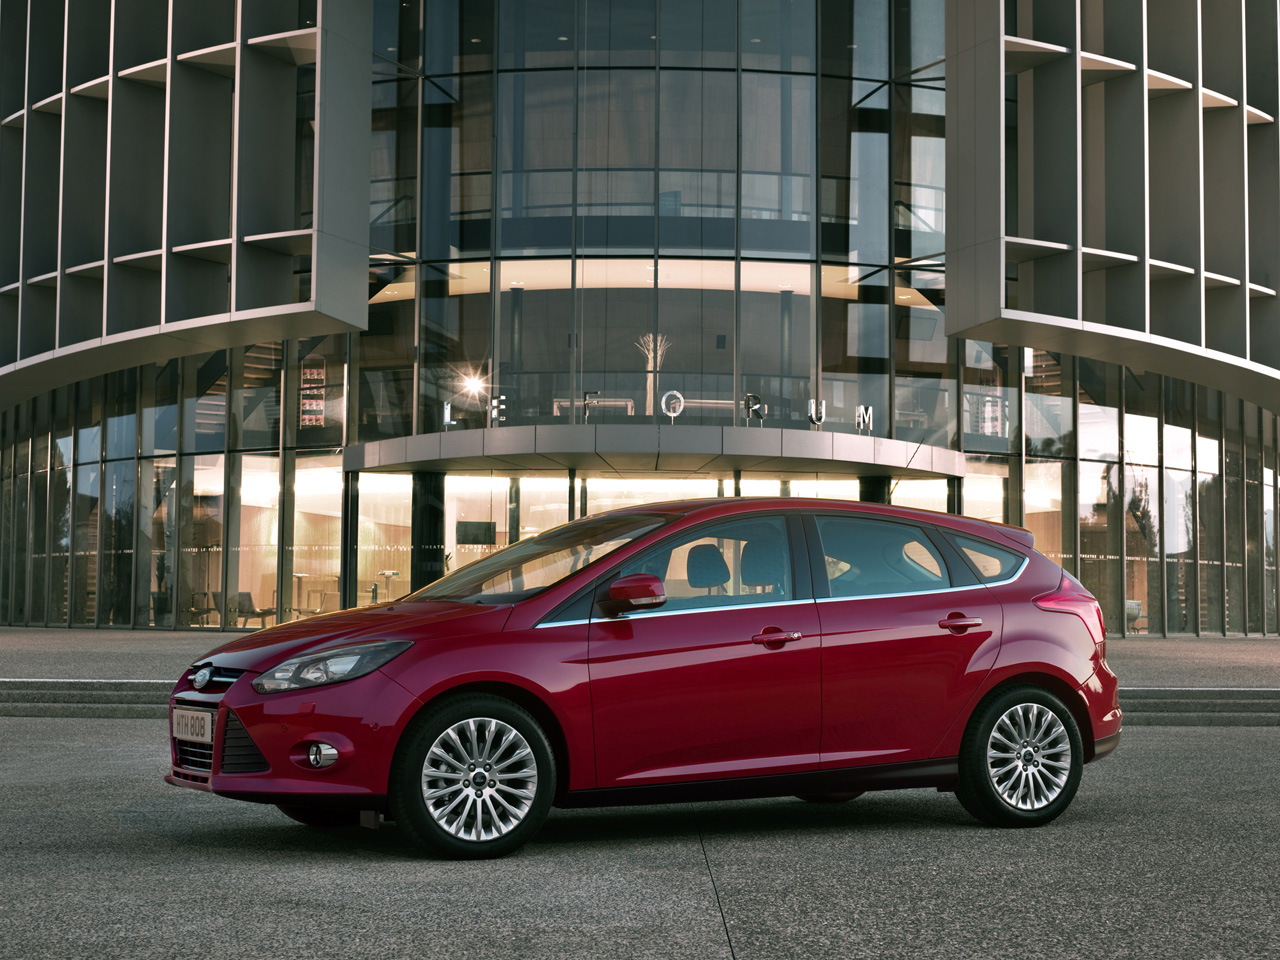 Ford Focus 2012 lateral